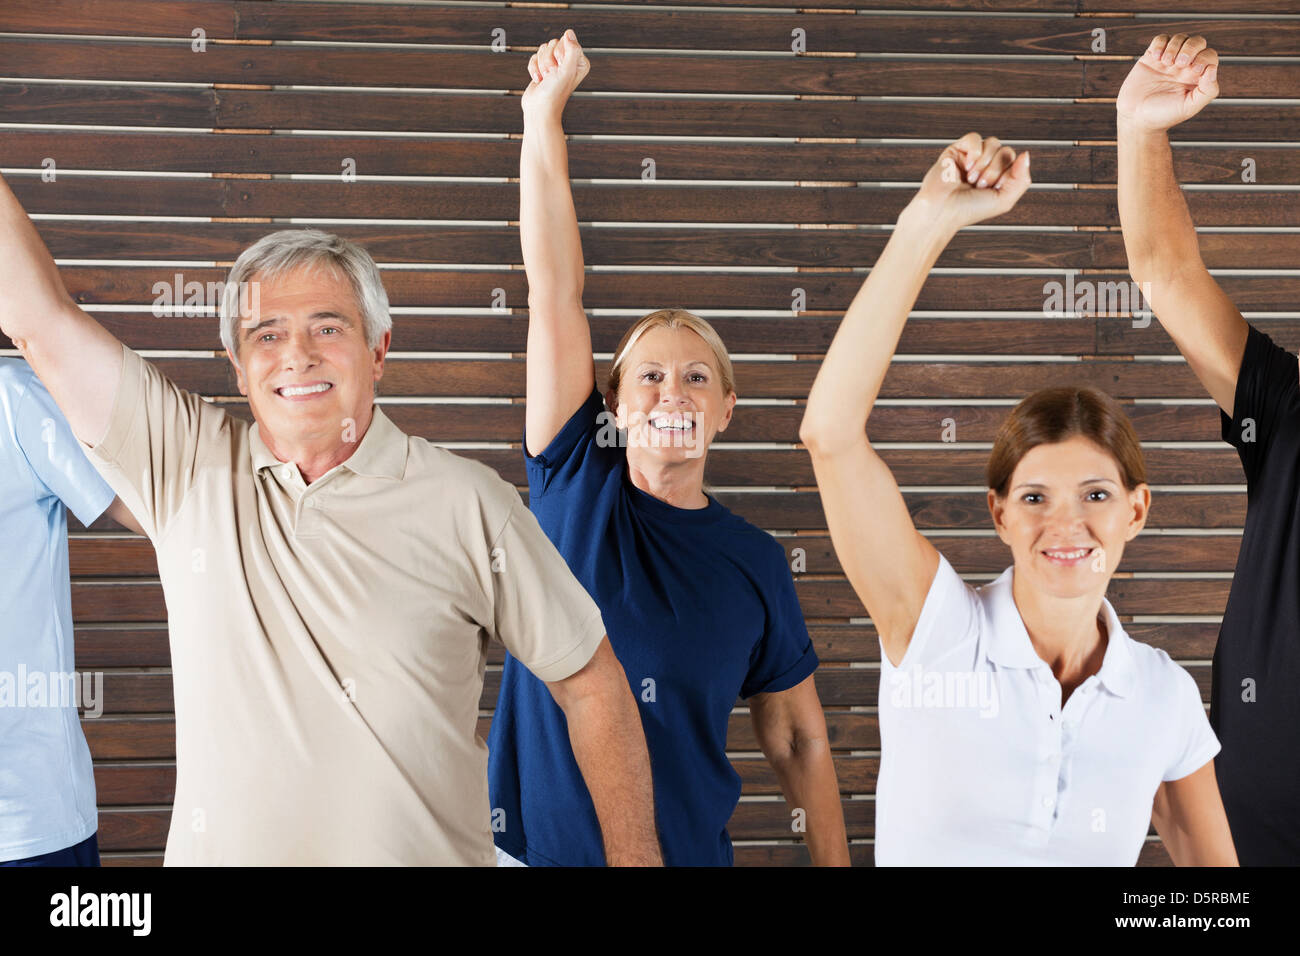 Cheering senior citizens at workout in fitness center gym Stock Photo